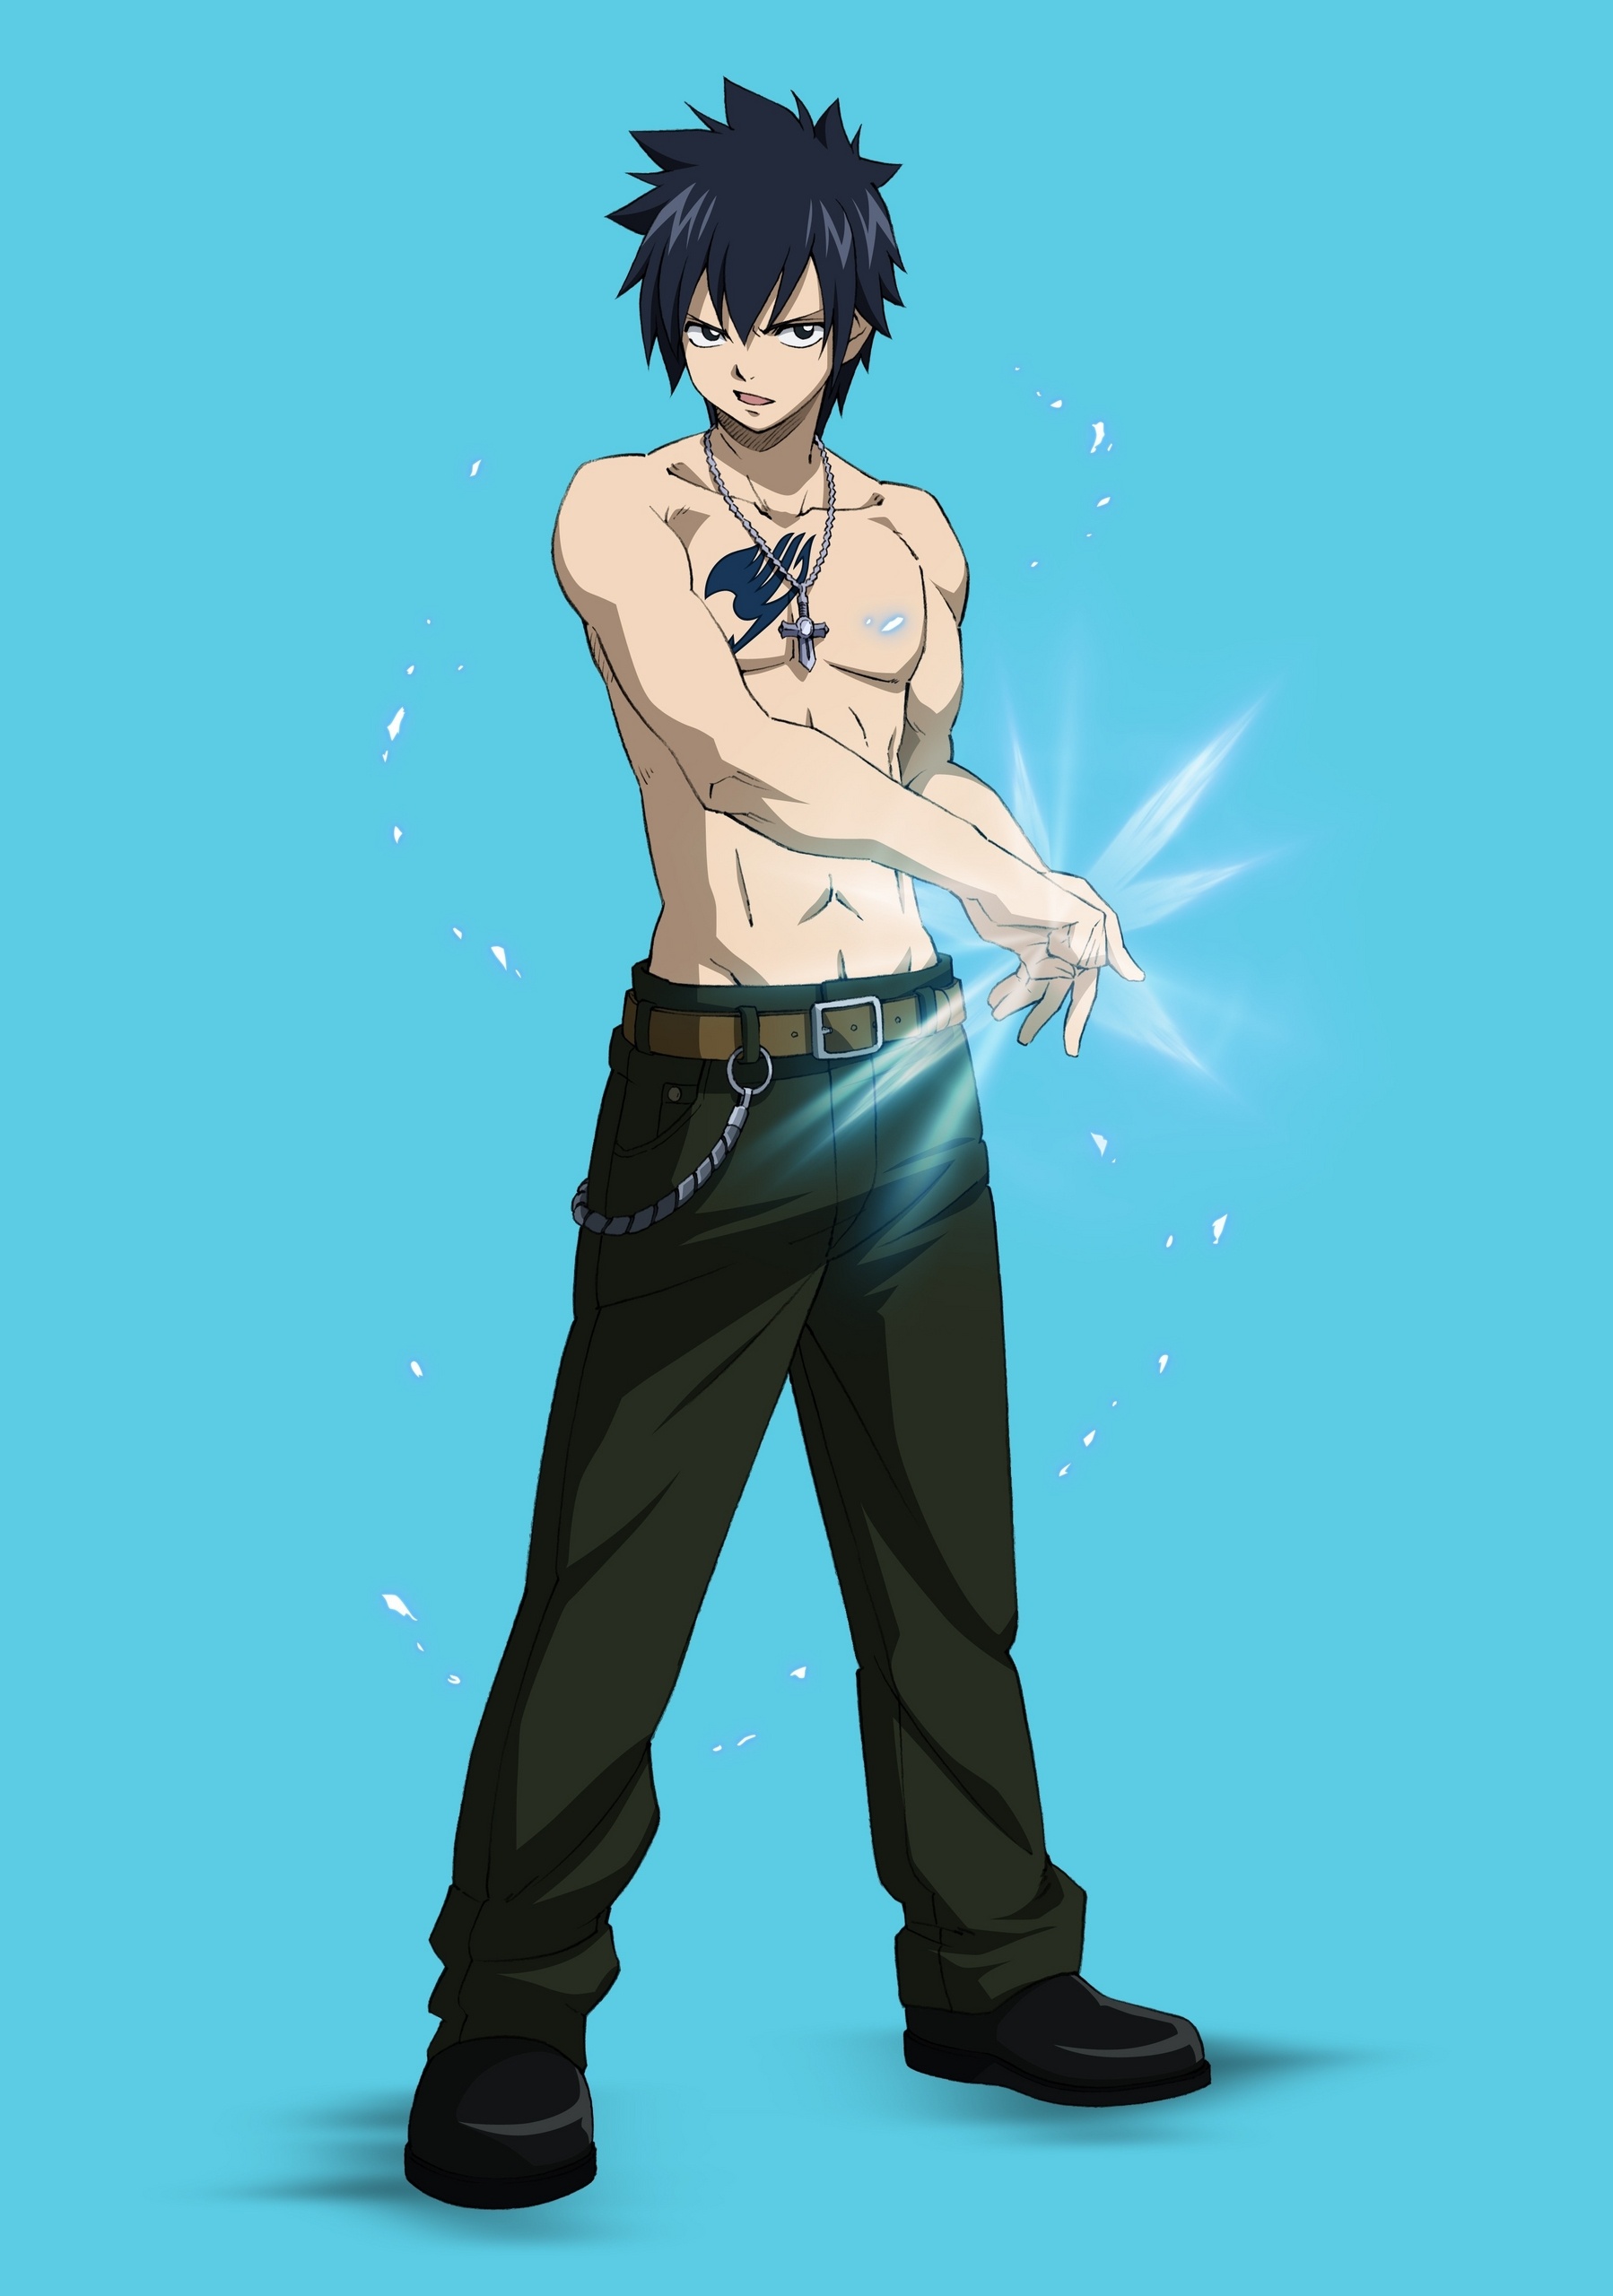 Gray Fullbuster: Ice-Make: Lance, Creating long, curved ice lances for shooting toward the enemy. 1800x2560 HD Background.